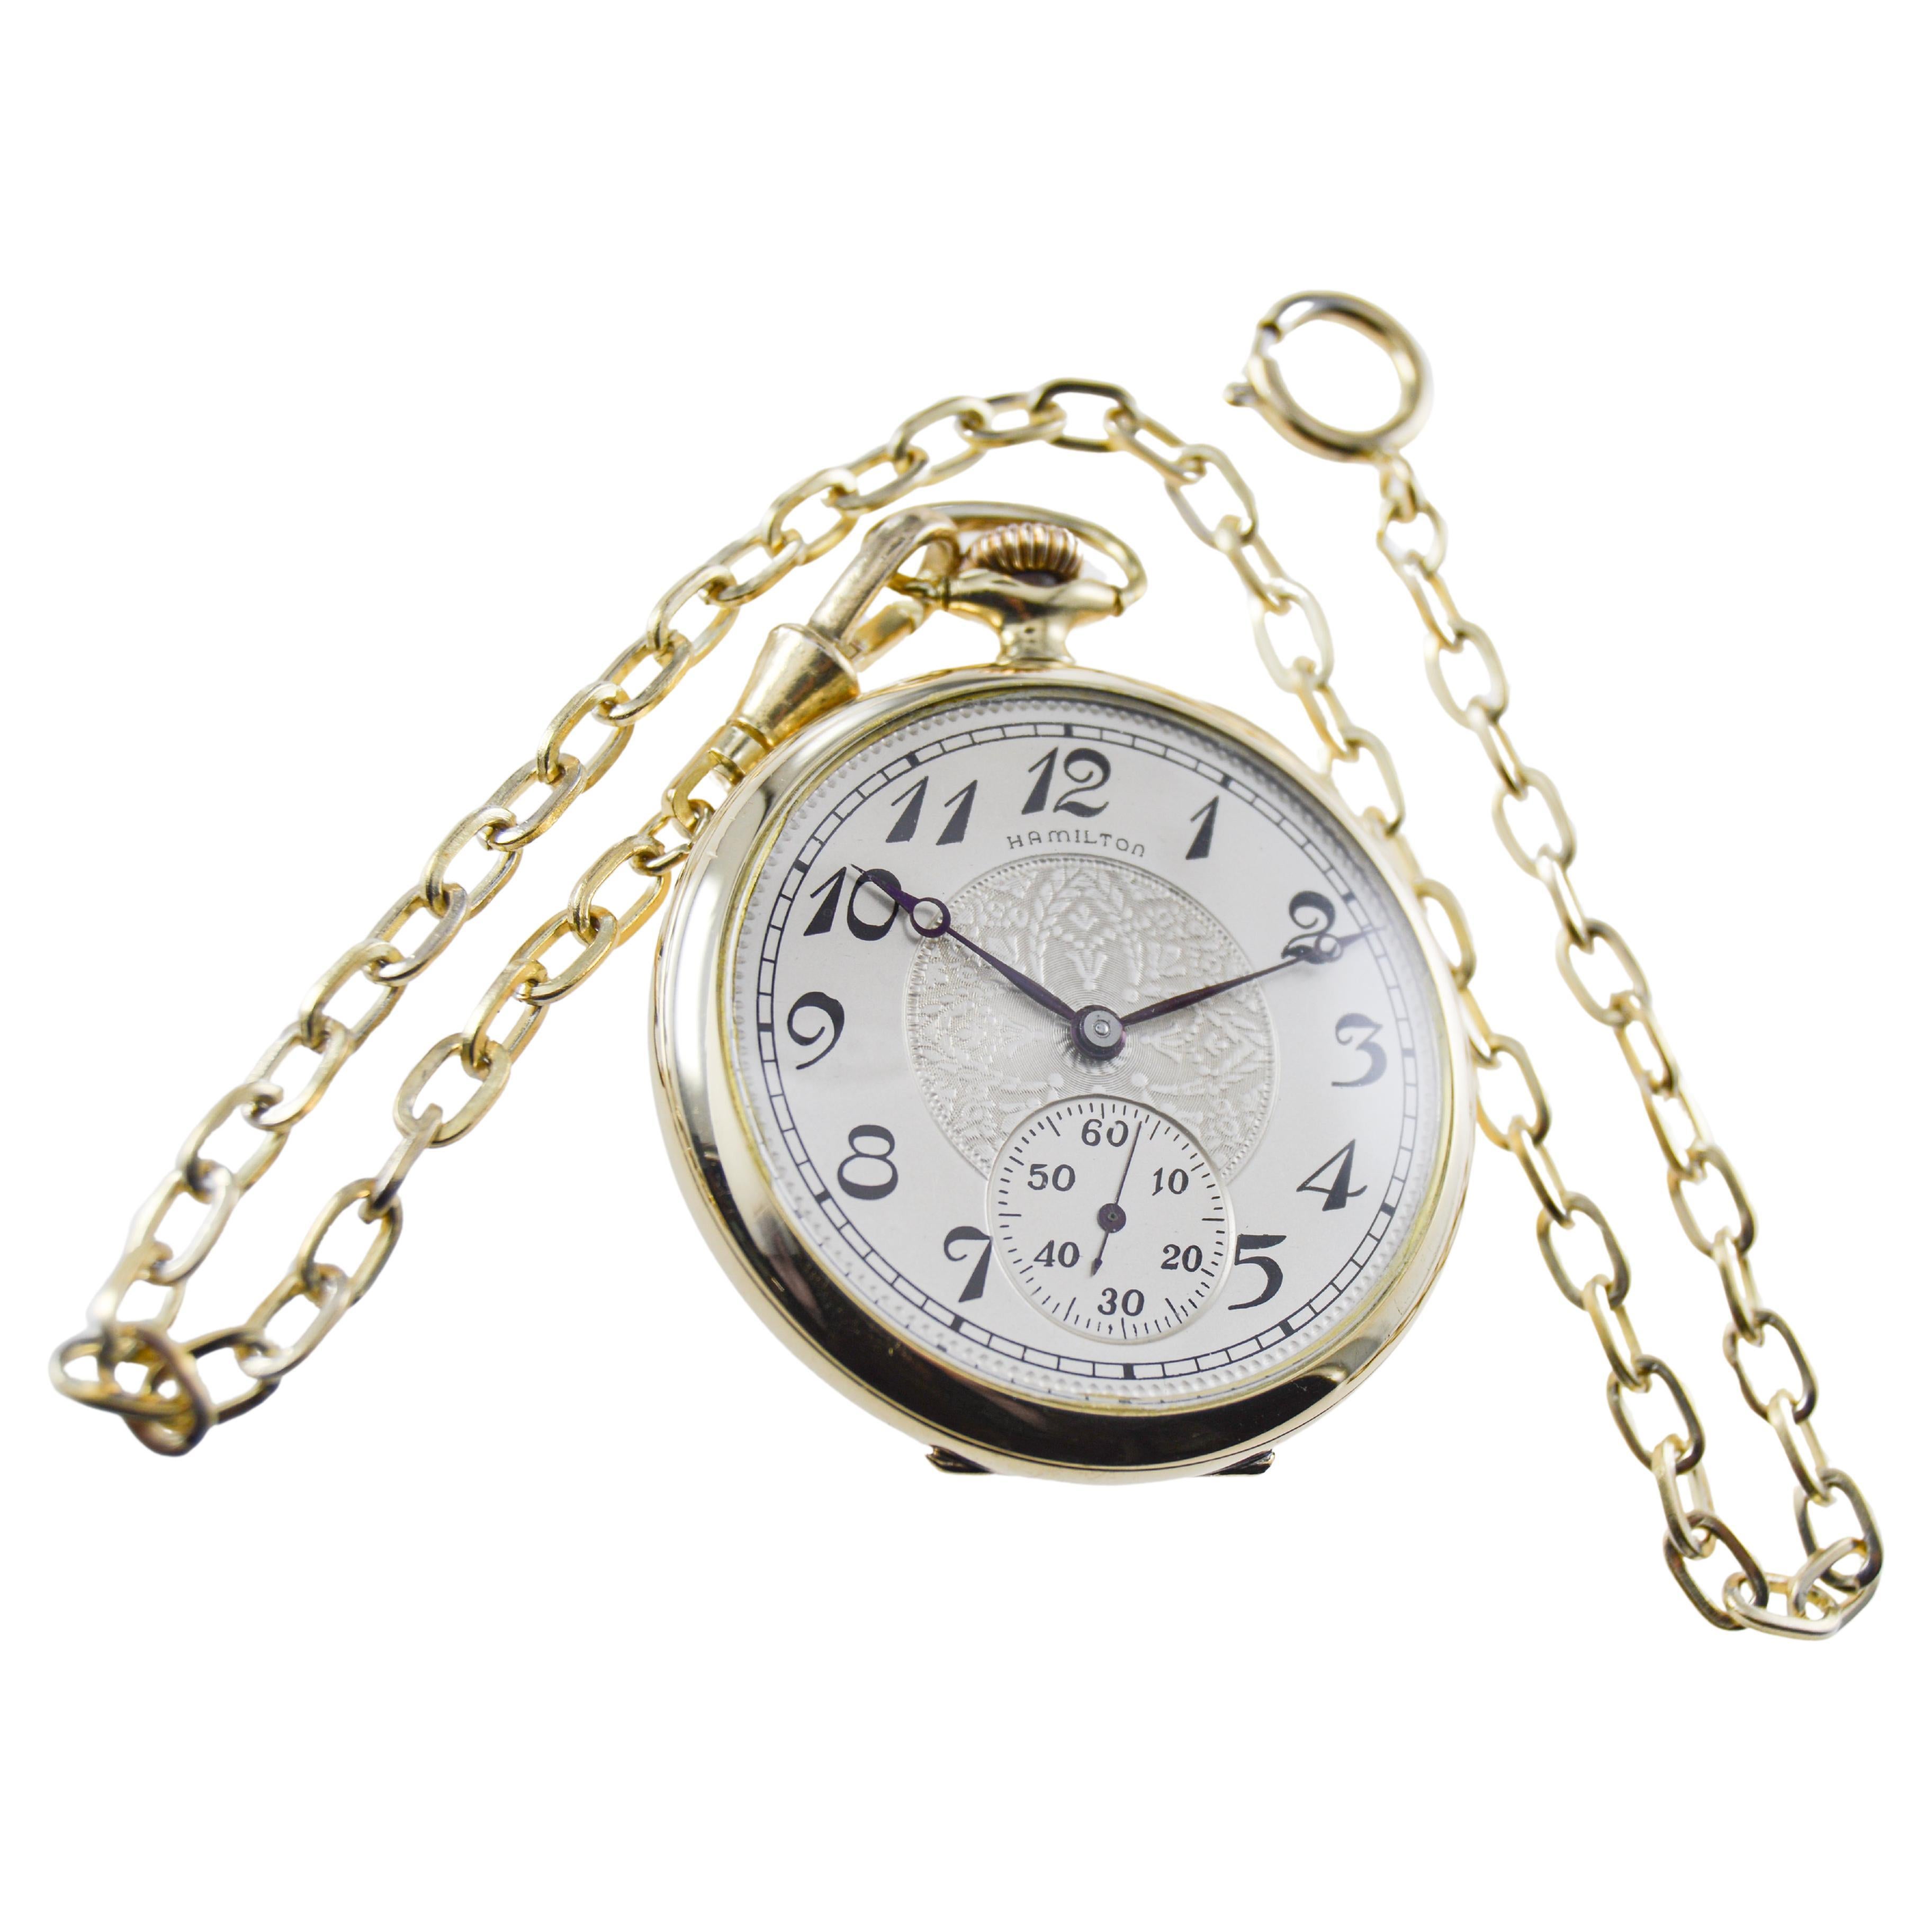 FACTORY / HOUSE: Hamilton Watch Company
STYLE / REFERENCE: Open Faced Pocket Watch 
METAL / MATERIAL: Yellow Gold Filled 
CIRCA / YEAR: 1917
DIMENSIONS / SIZE: Diameter 45mm 
MOVEMENT / CALIBER: Manual Winding / 17 Jewels / Caliber 910
DIAL / HANDS: